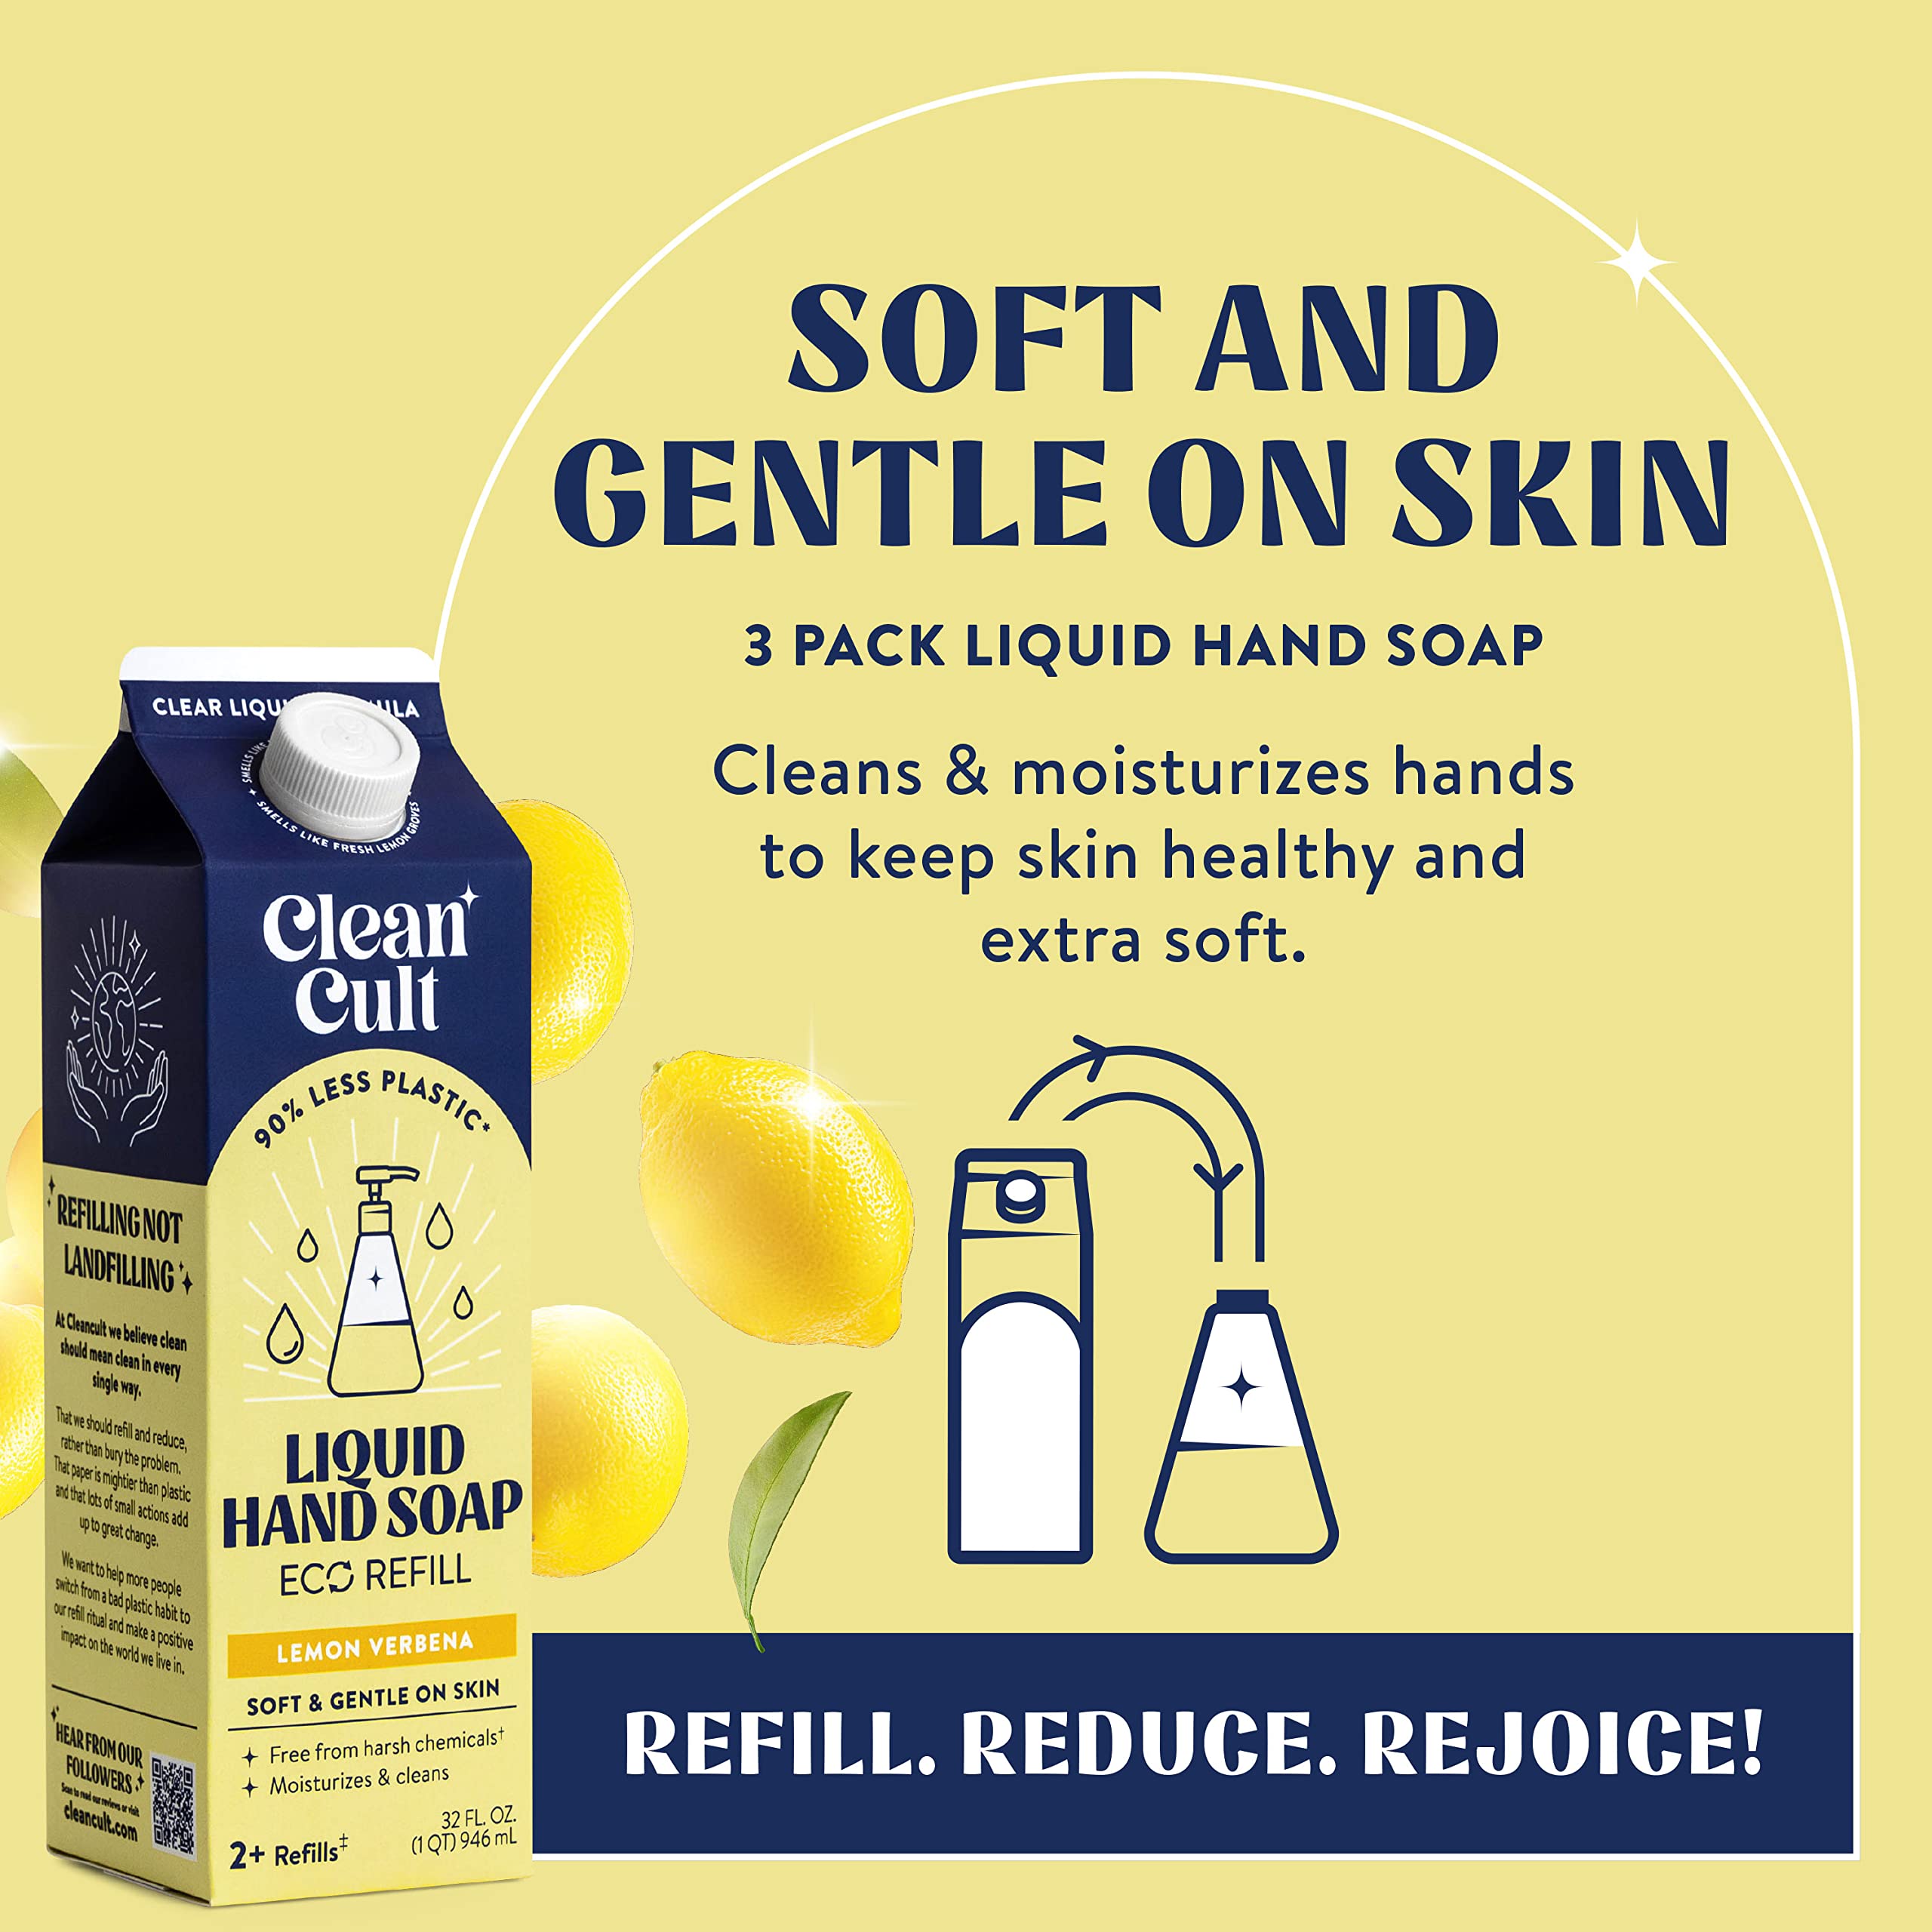 Cleancult - Liquid Hand Soap Refills - Lemon Verbena - Made with Aloe Vera & Essential Oil - Nourishes & Moisturizes Dry & Sensitive Skin - Eco Friendly - Paper-Based Packaging - 32 oz/6 Pack